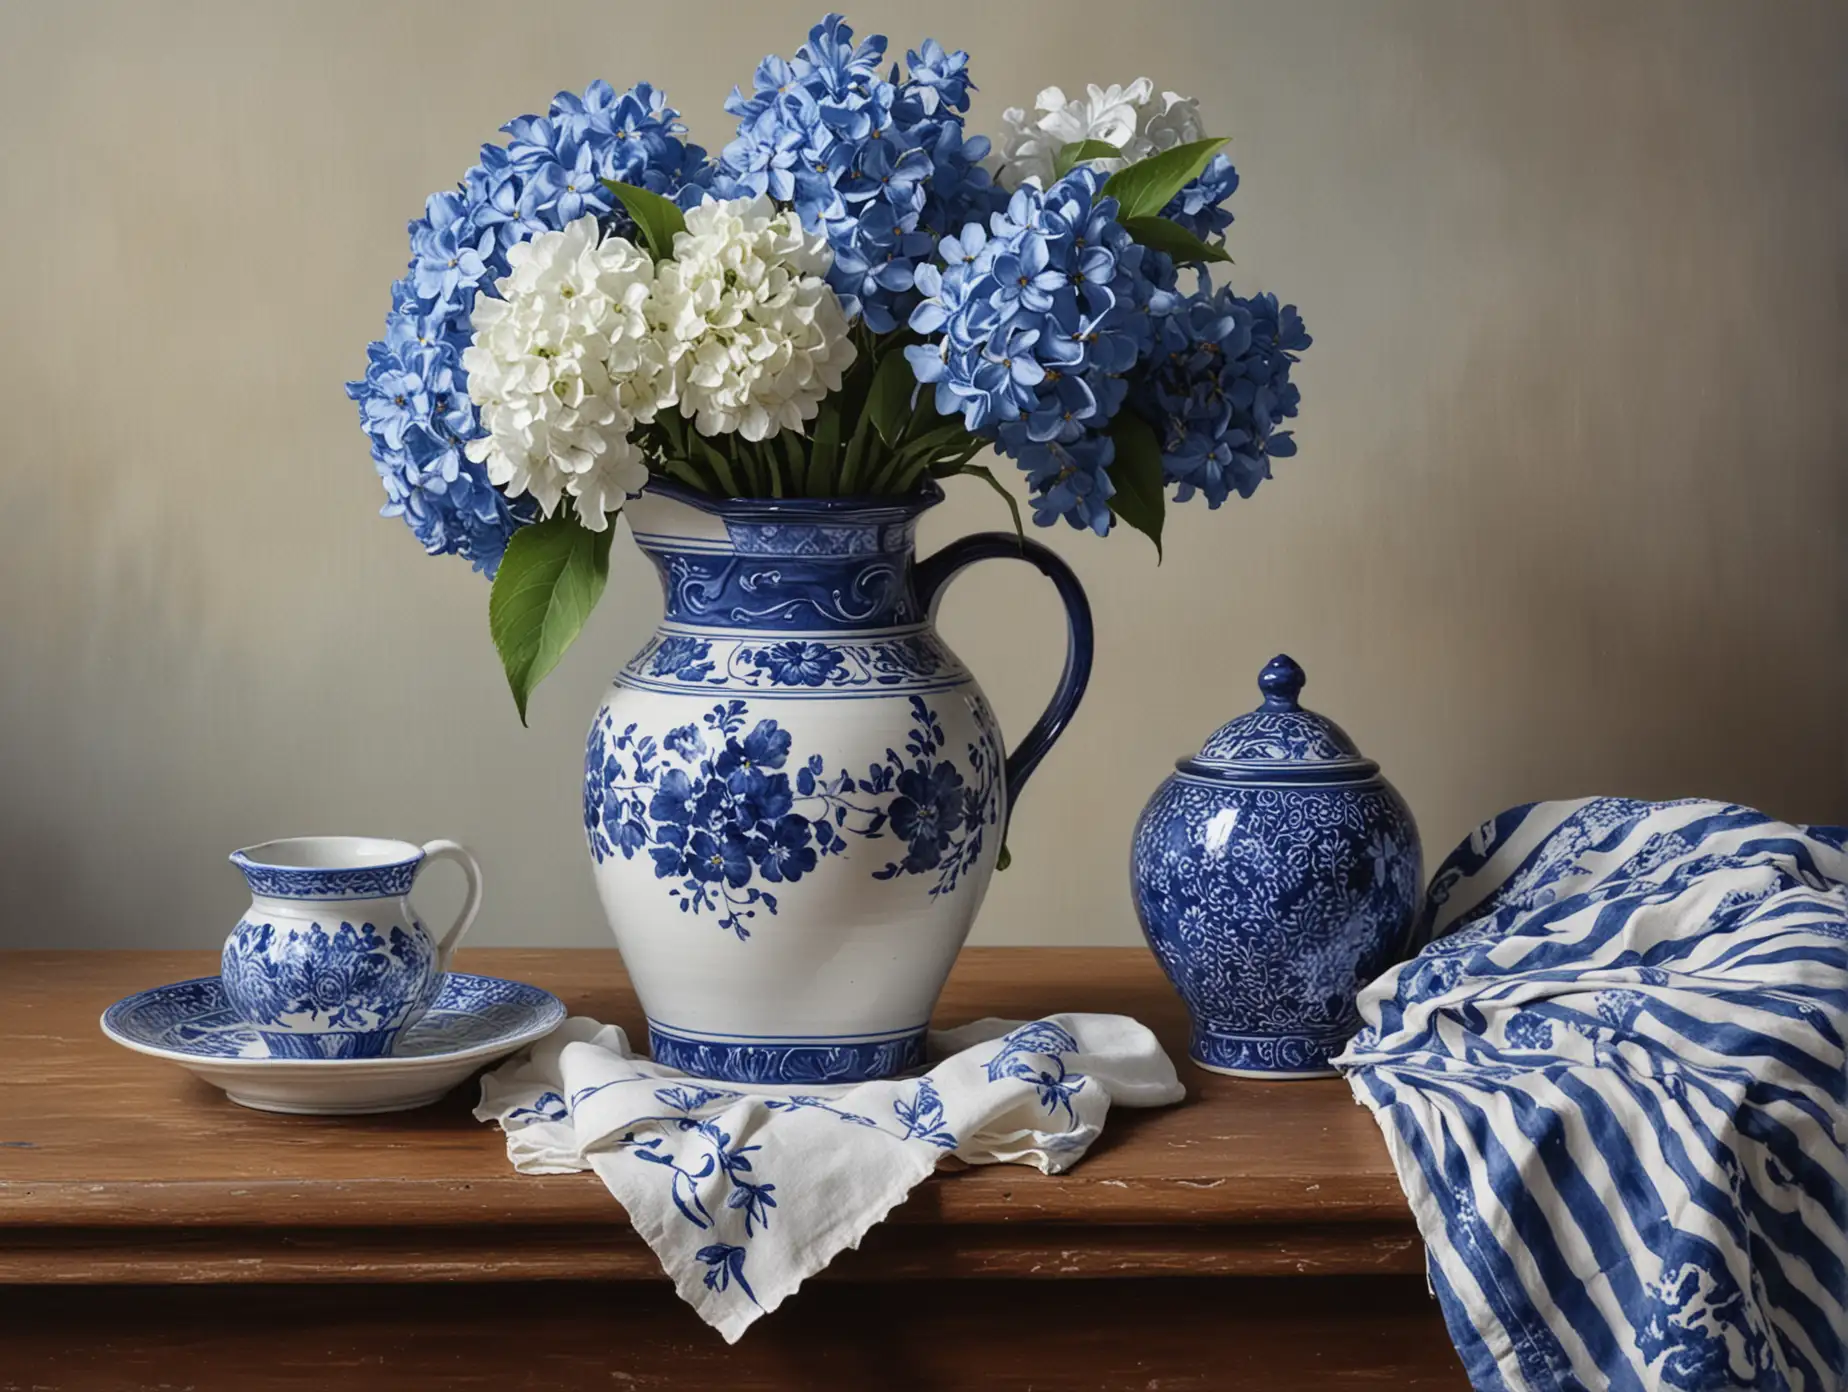 Blue and White Pitcher with Hydrangeas on Tablecloth Still Life Painting